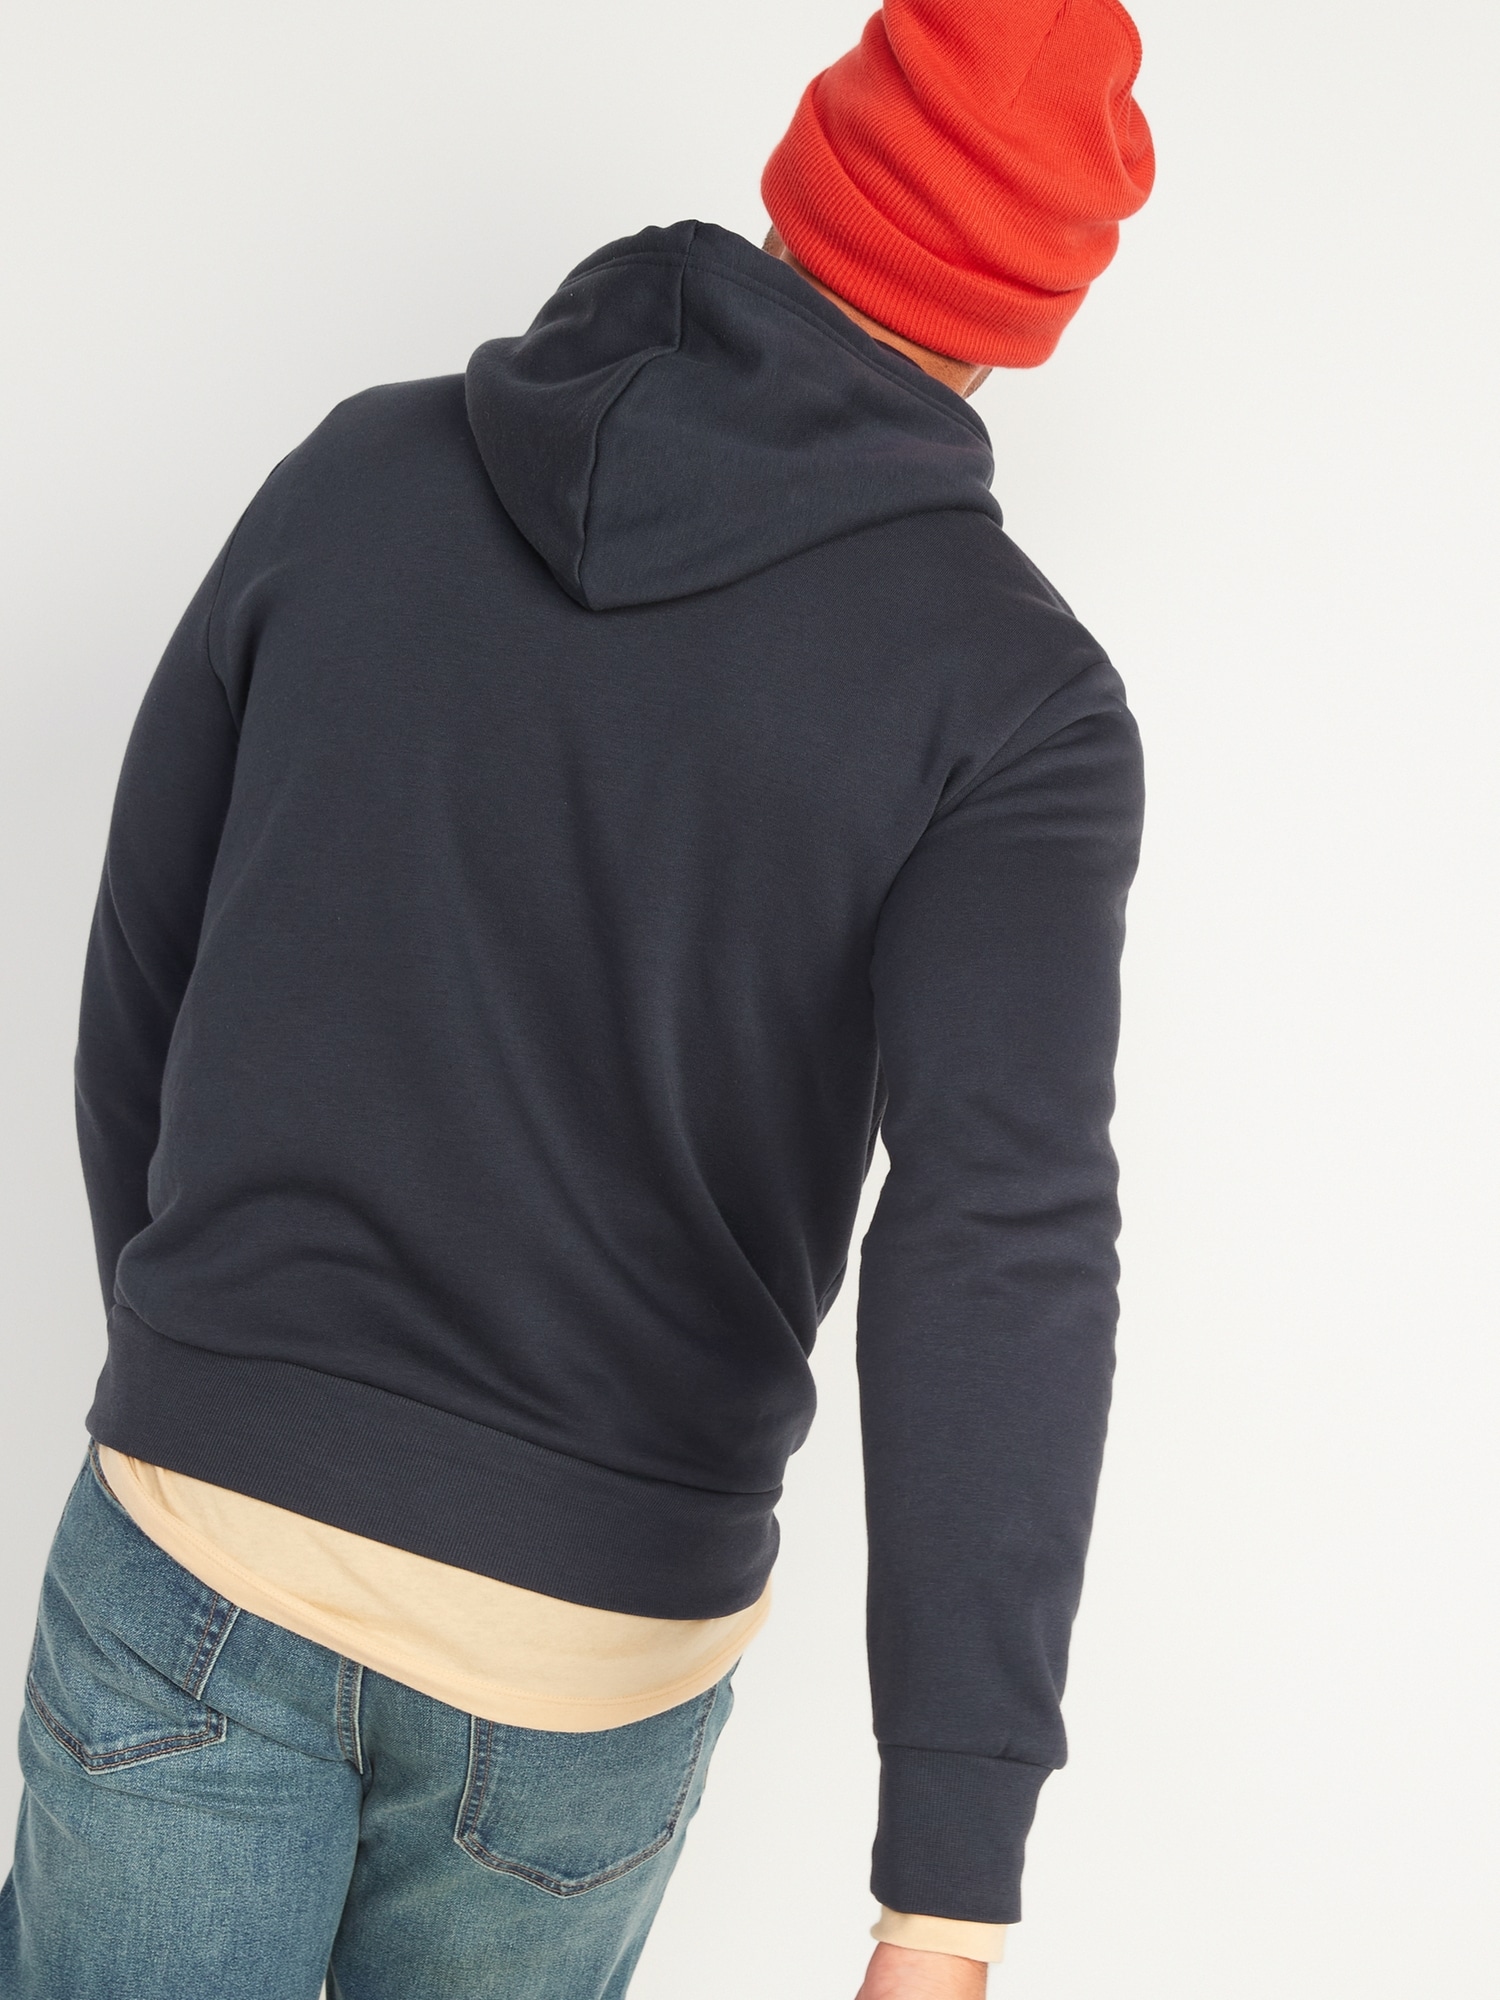 Navy for Pullover Hoodie Men | Classic Old